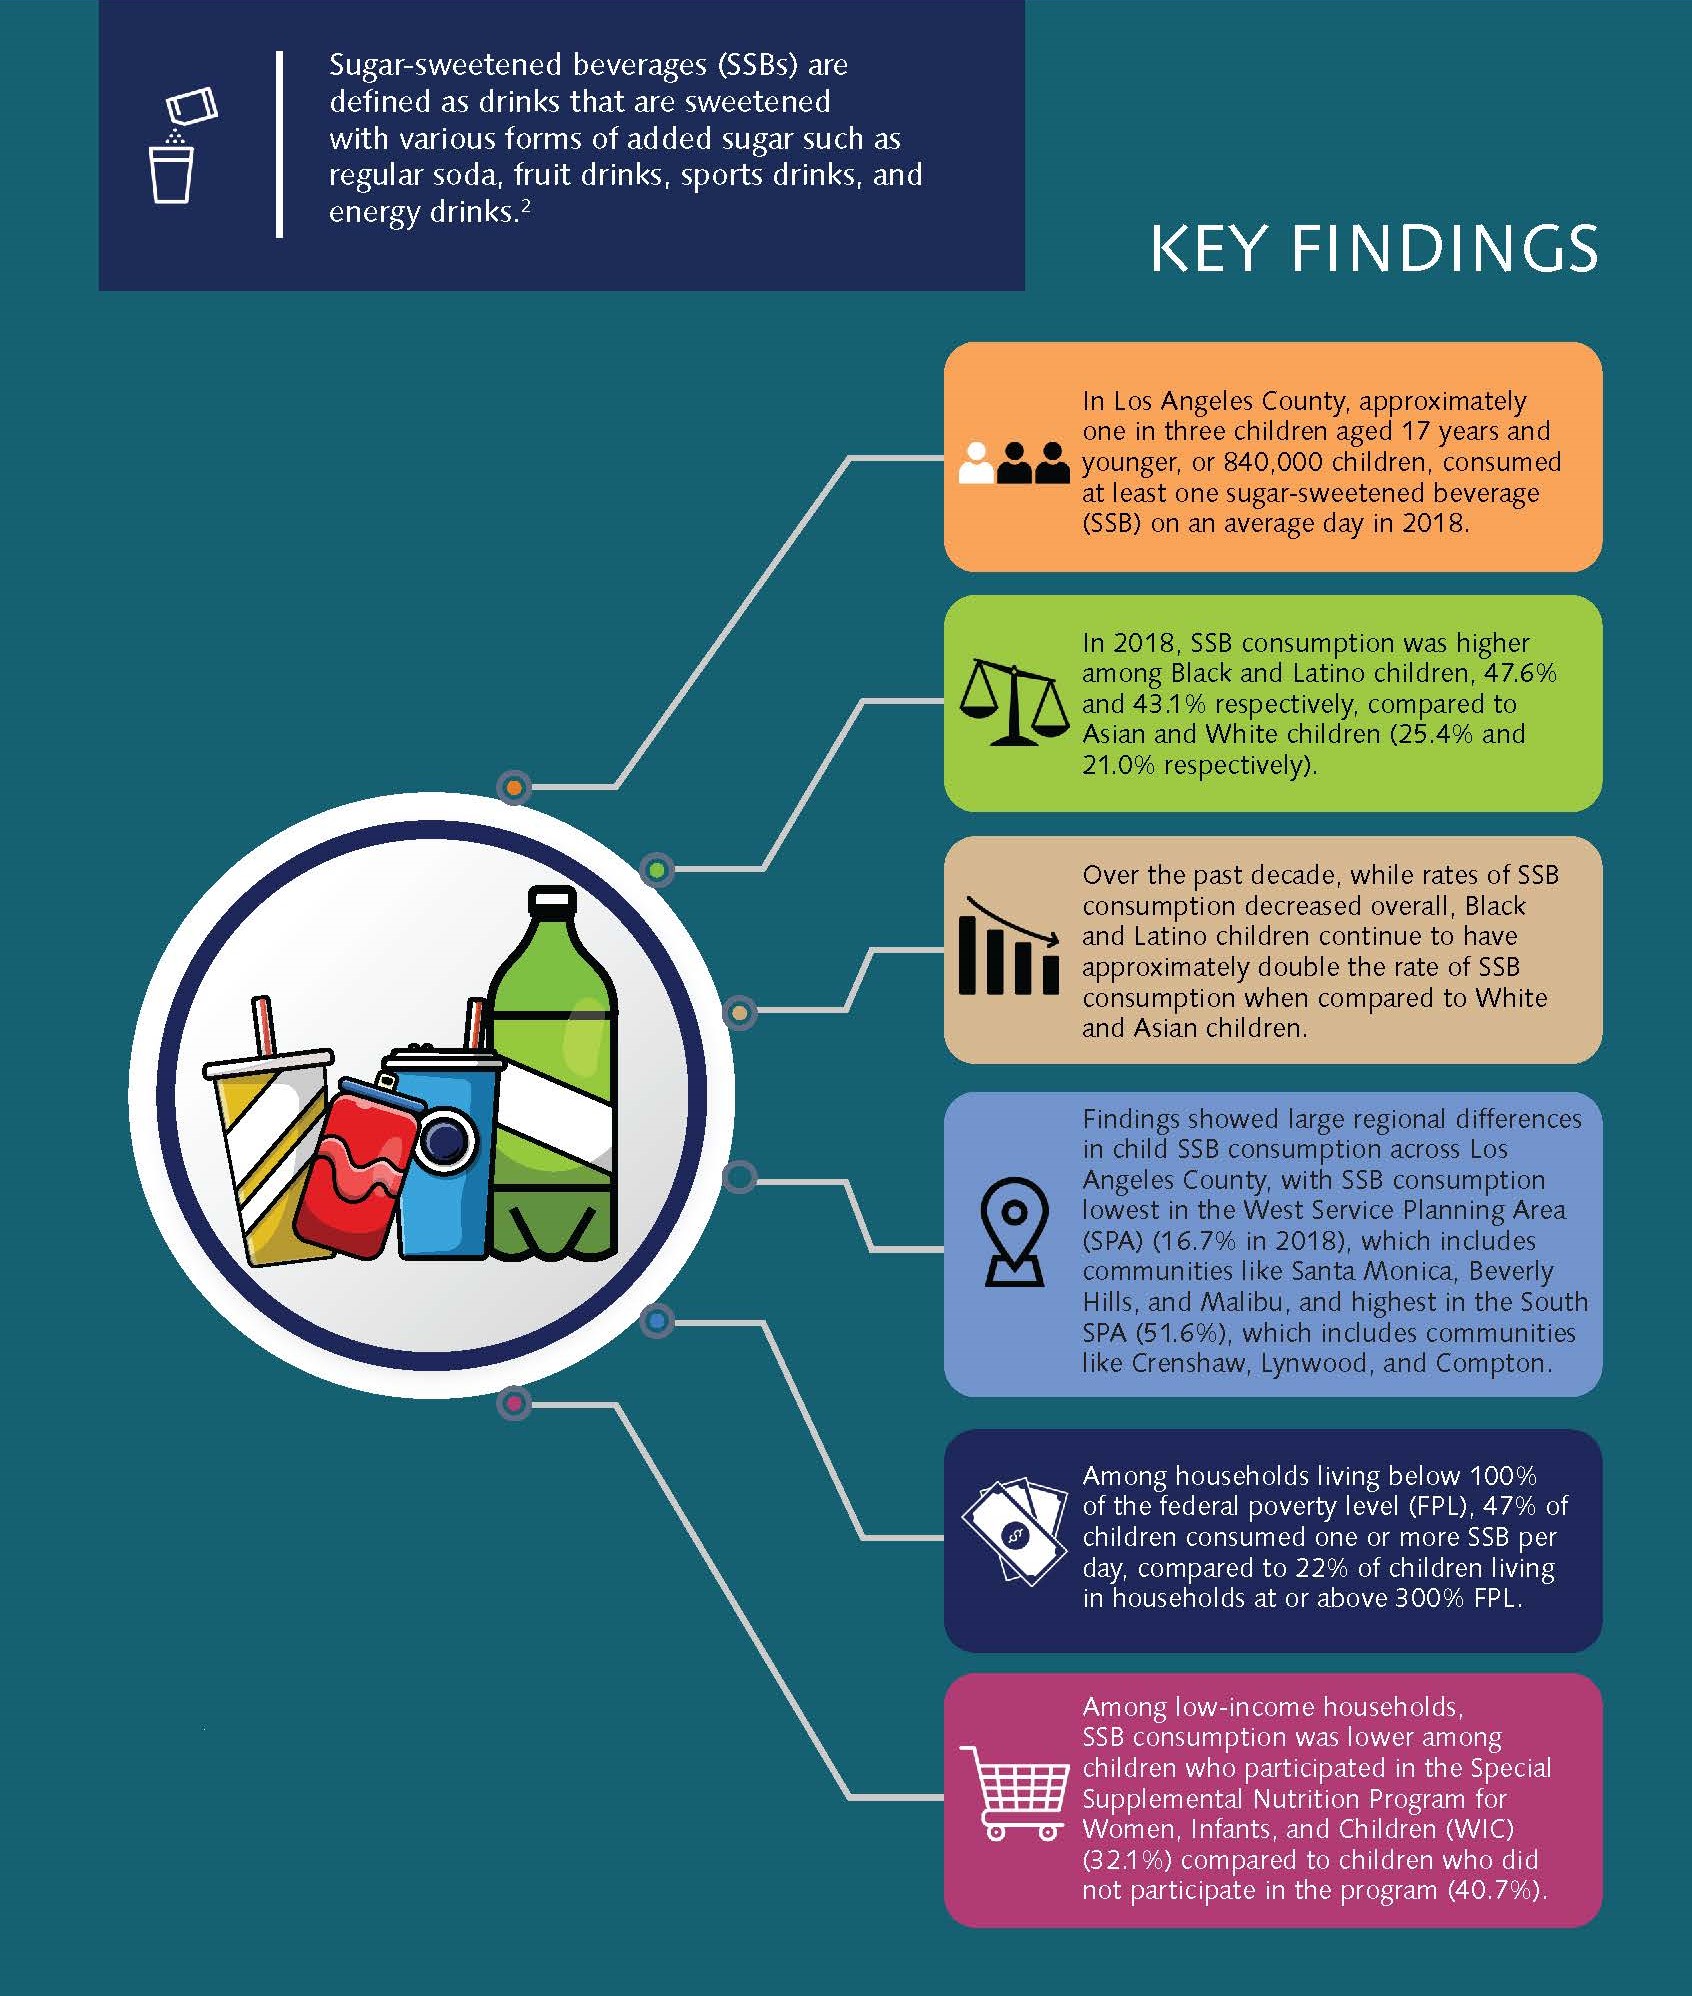 Sample page of key findings from sugar-sweetened beverage report.